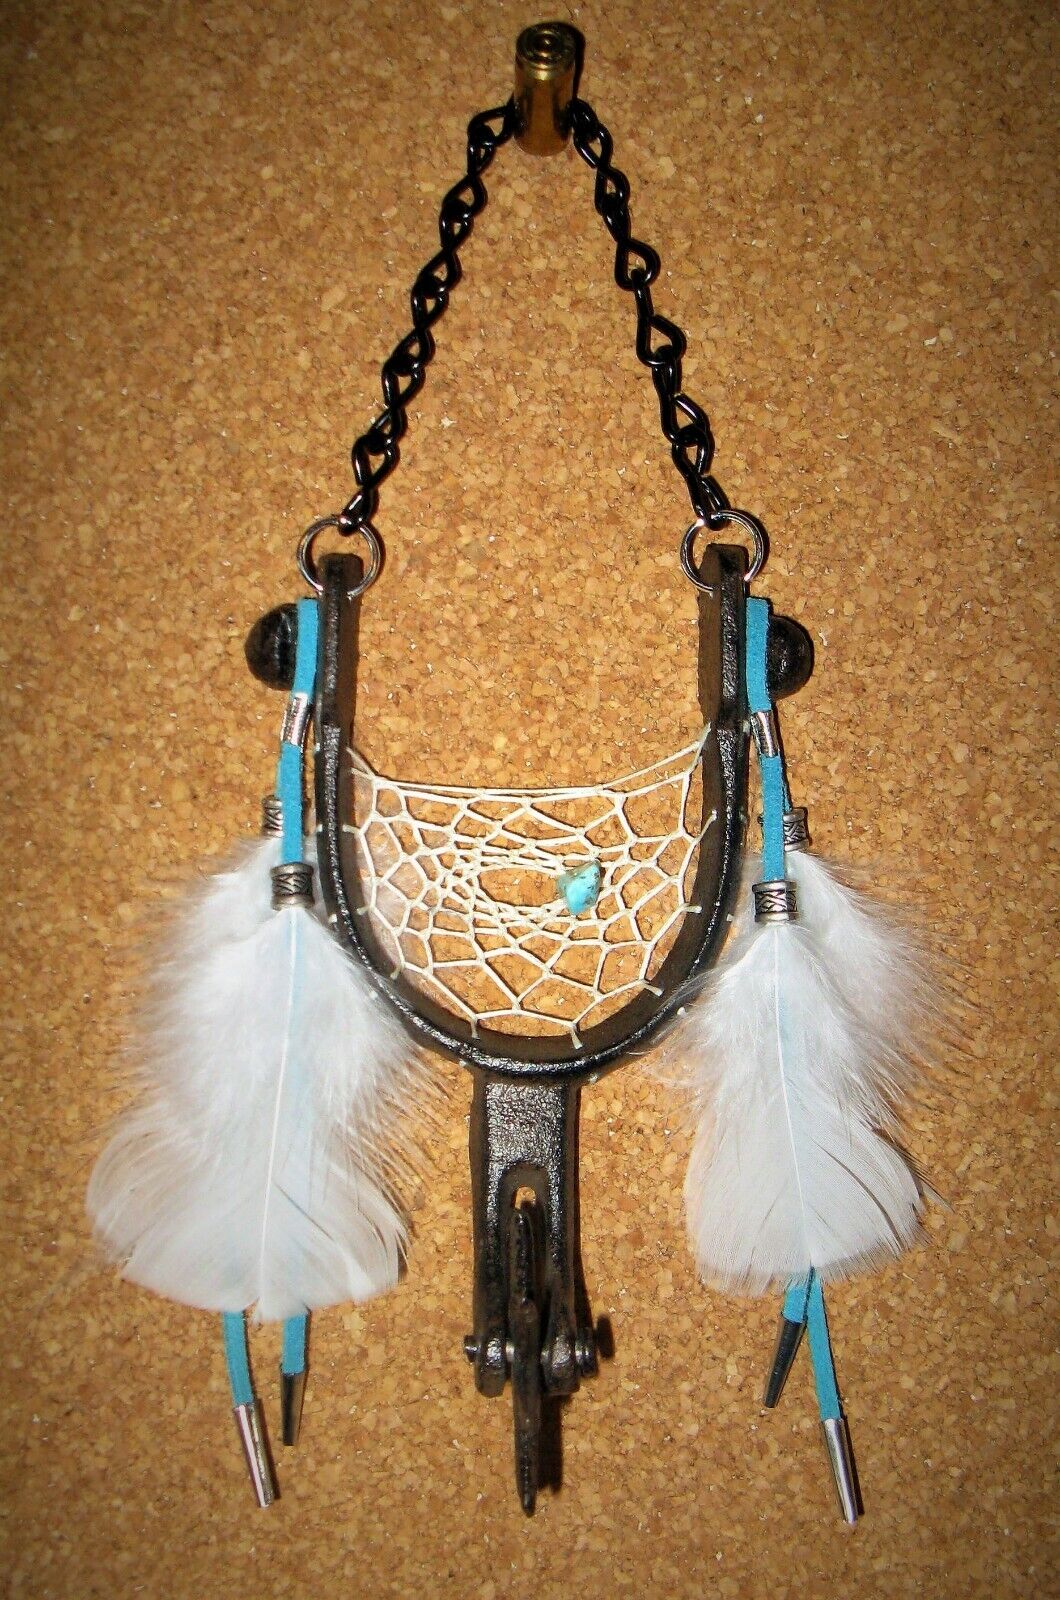 Boot Spur DREAM CATCHER Handcrafted Cowboy Rustic Western Equestrian Decor